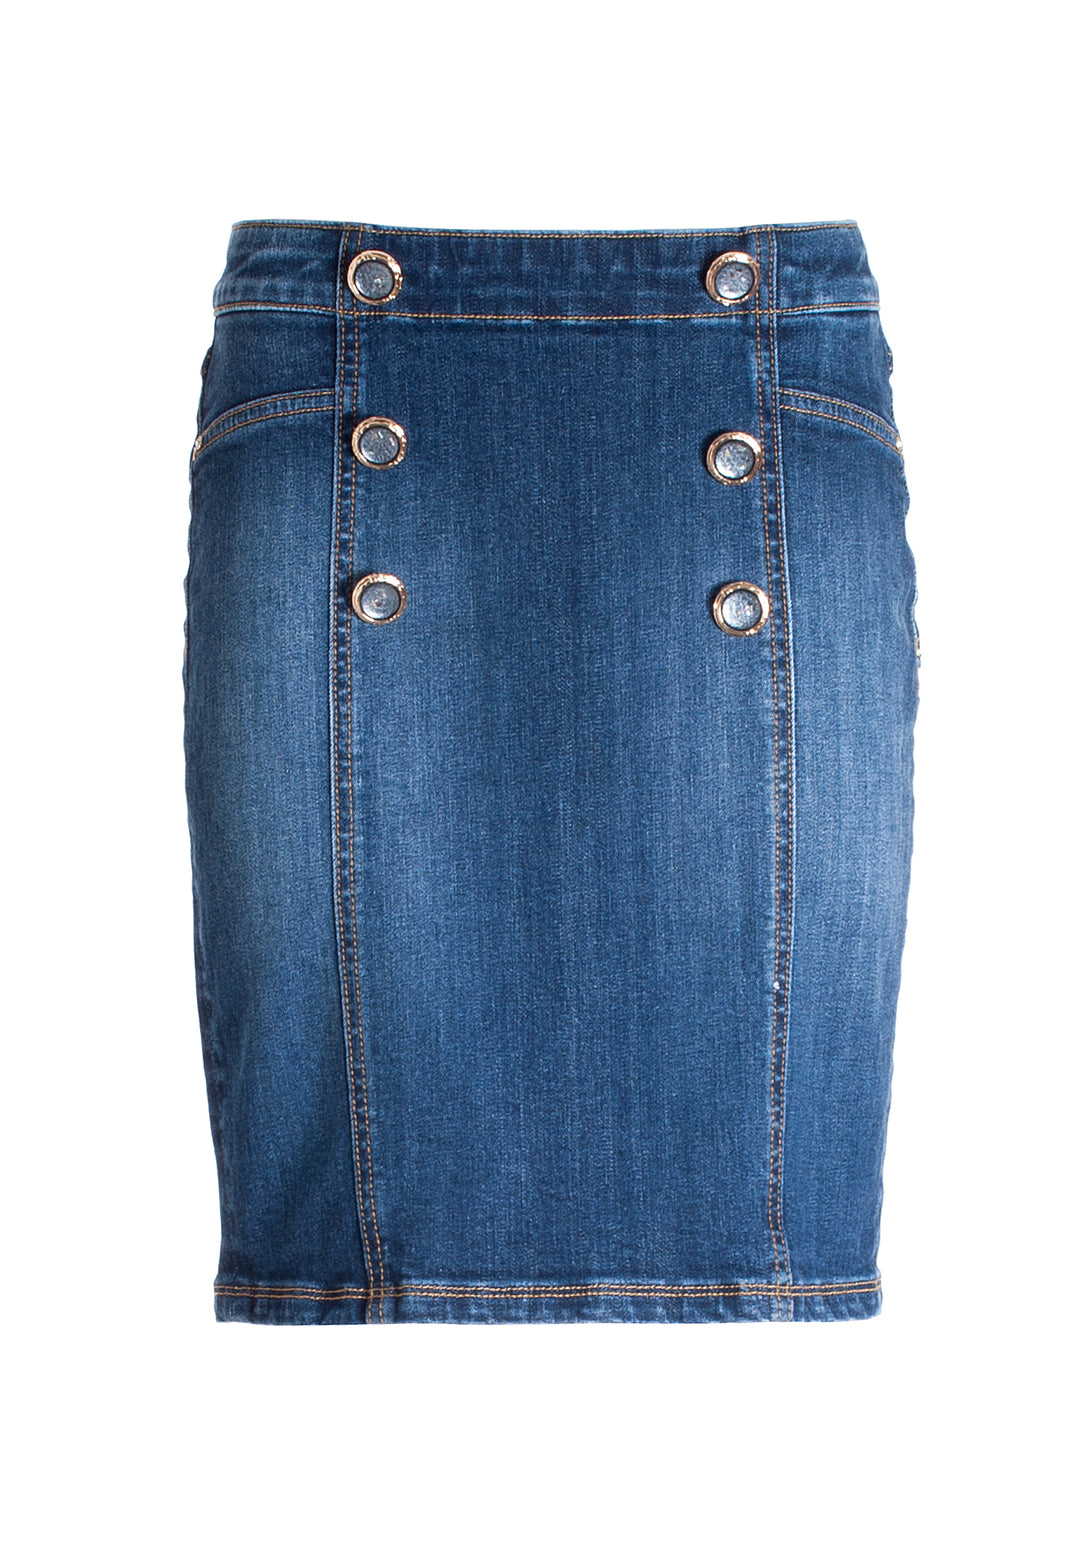 Mini sheat skirt tight fit made in denim with middle wash